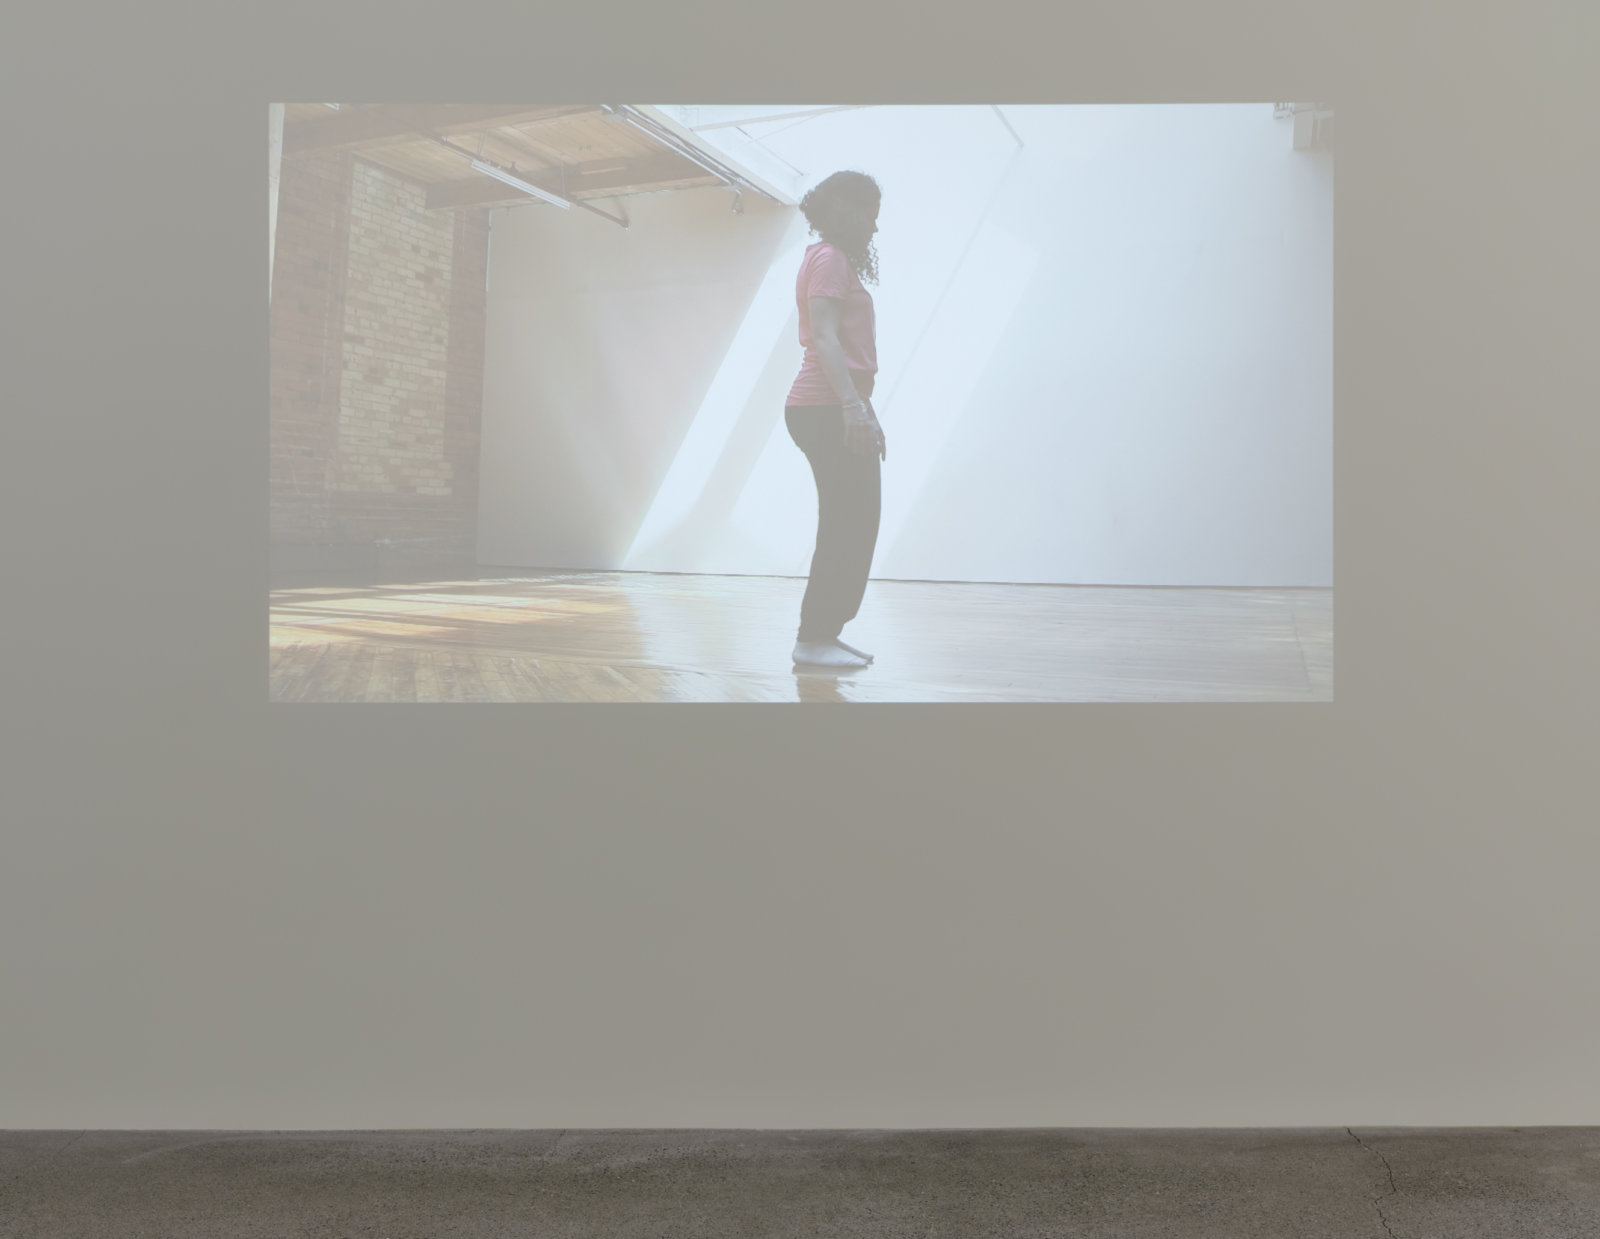 Tanya Lukin Linklater, ...you are judged to be going against the flow because you are insistent., Parts 1 and 2 (detail), 2017, video, monitor (Part 1) 11:28 min; projection (Part 2), 14:52 min, dimensions variable